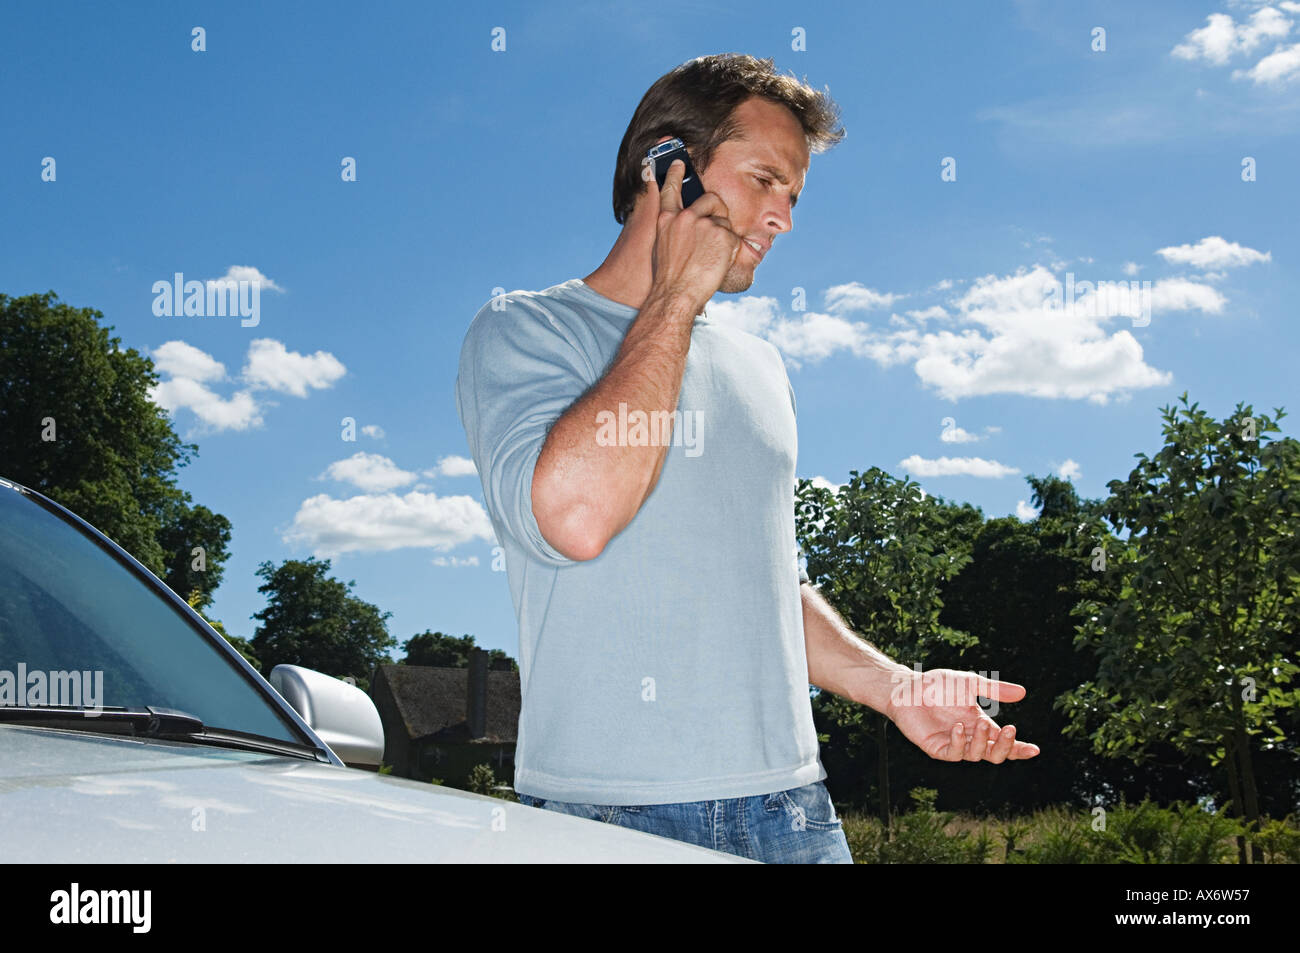 Man on mobile phone by his car Stock Photo